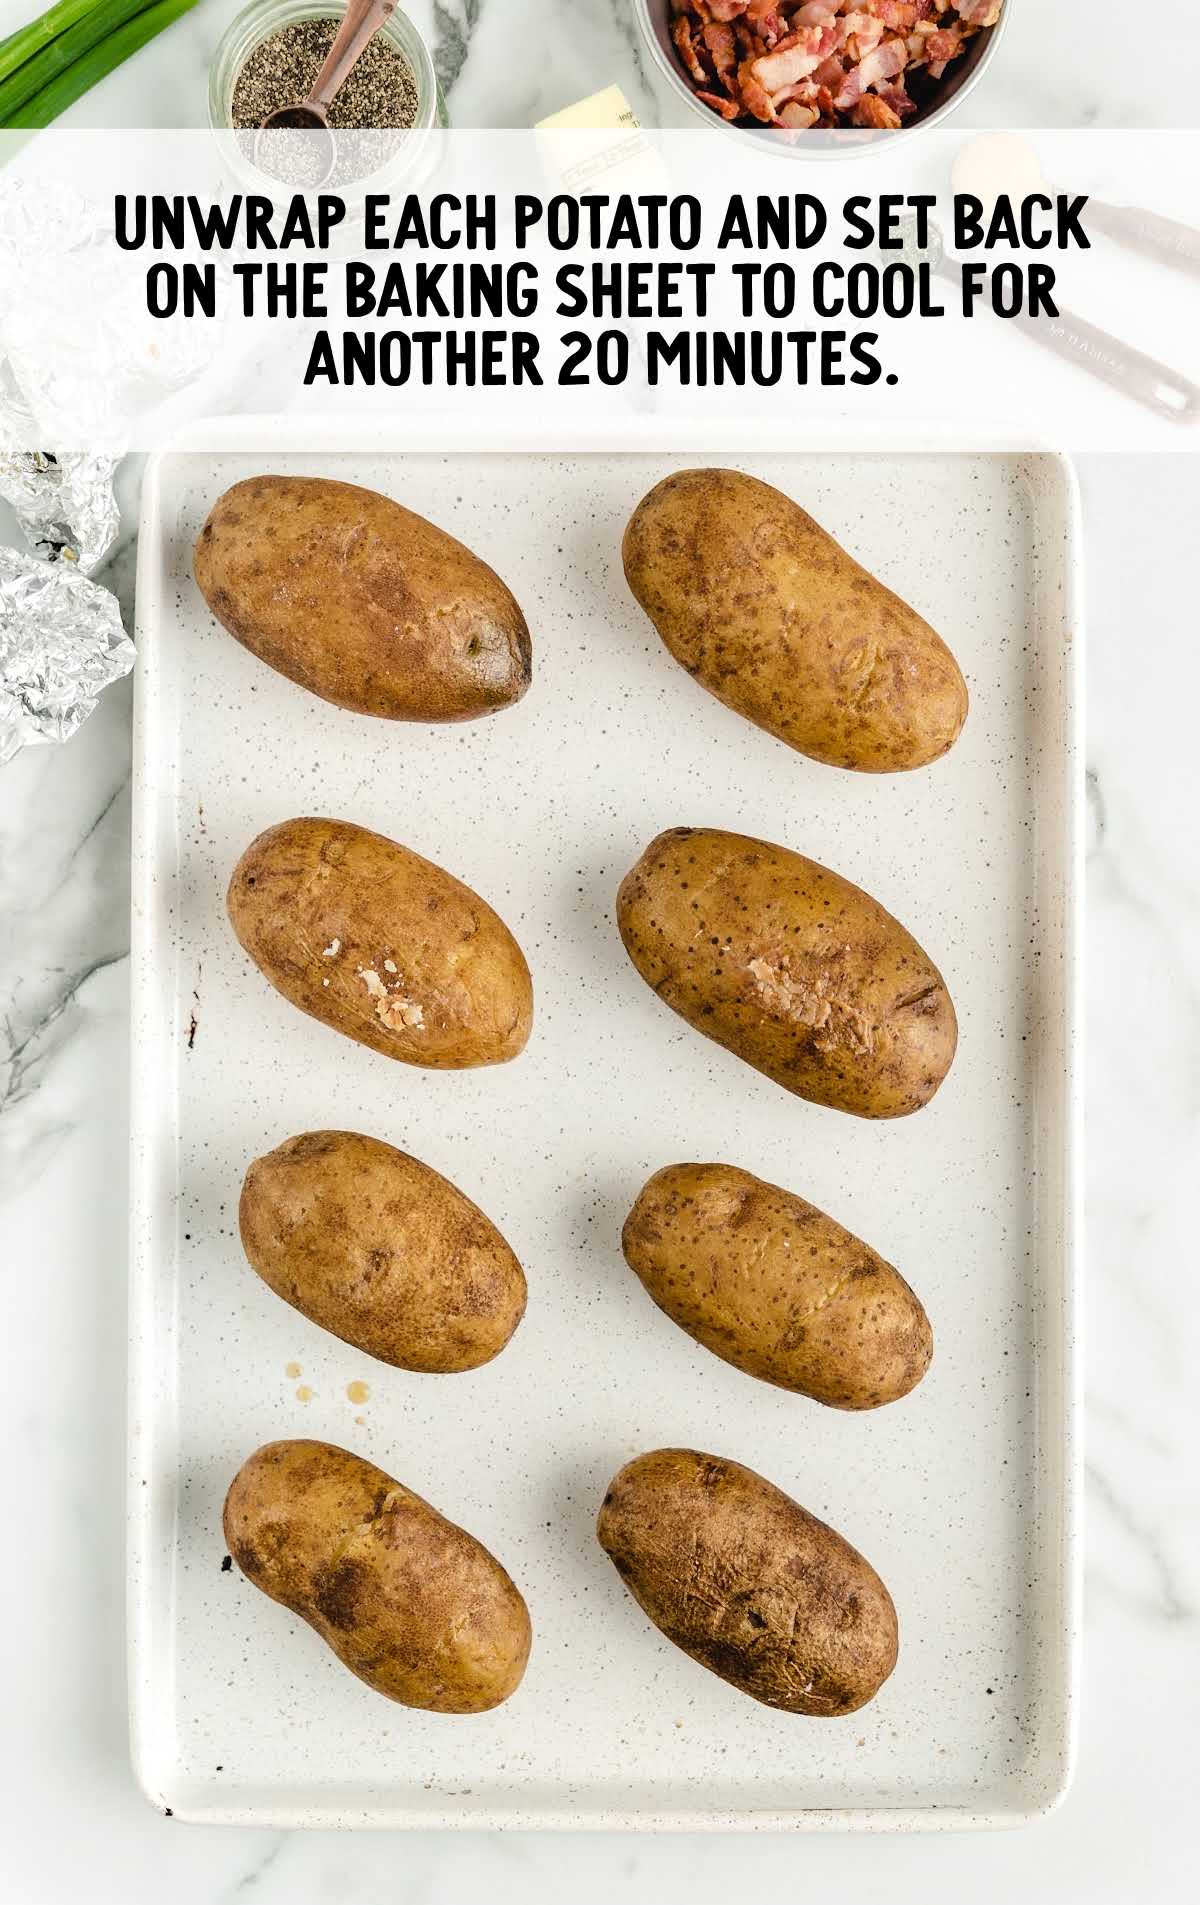 potatoes after being cooked and unwrapped